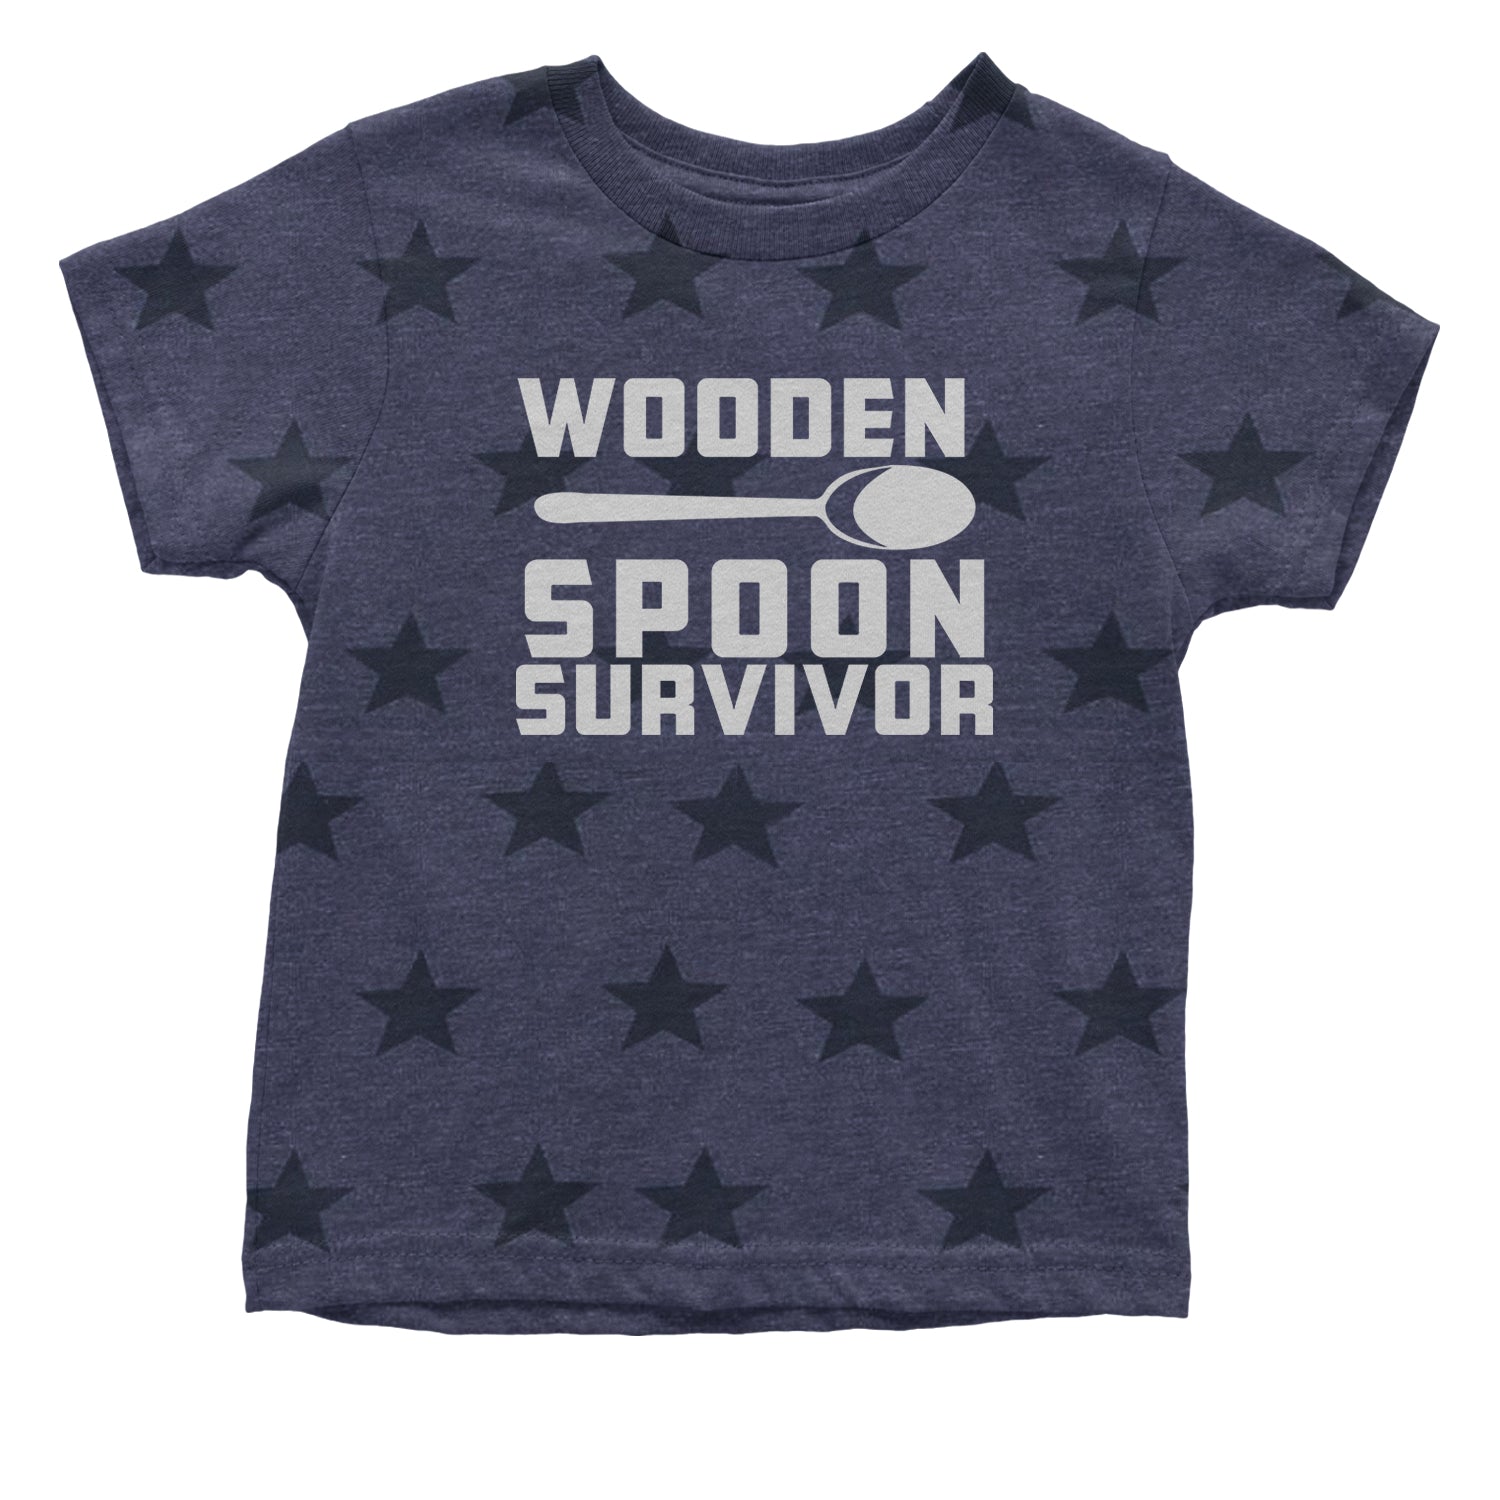 Wooden Spoon Survivor Infant One-Piece Romper Bodysuit and Toddler T-shirt funny, shirt, spoon, survivor, wooden by Expression Tees